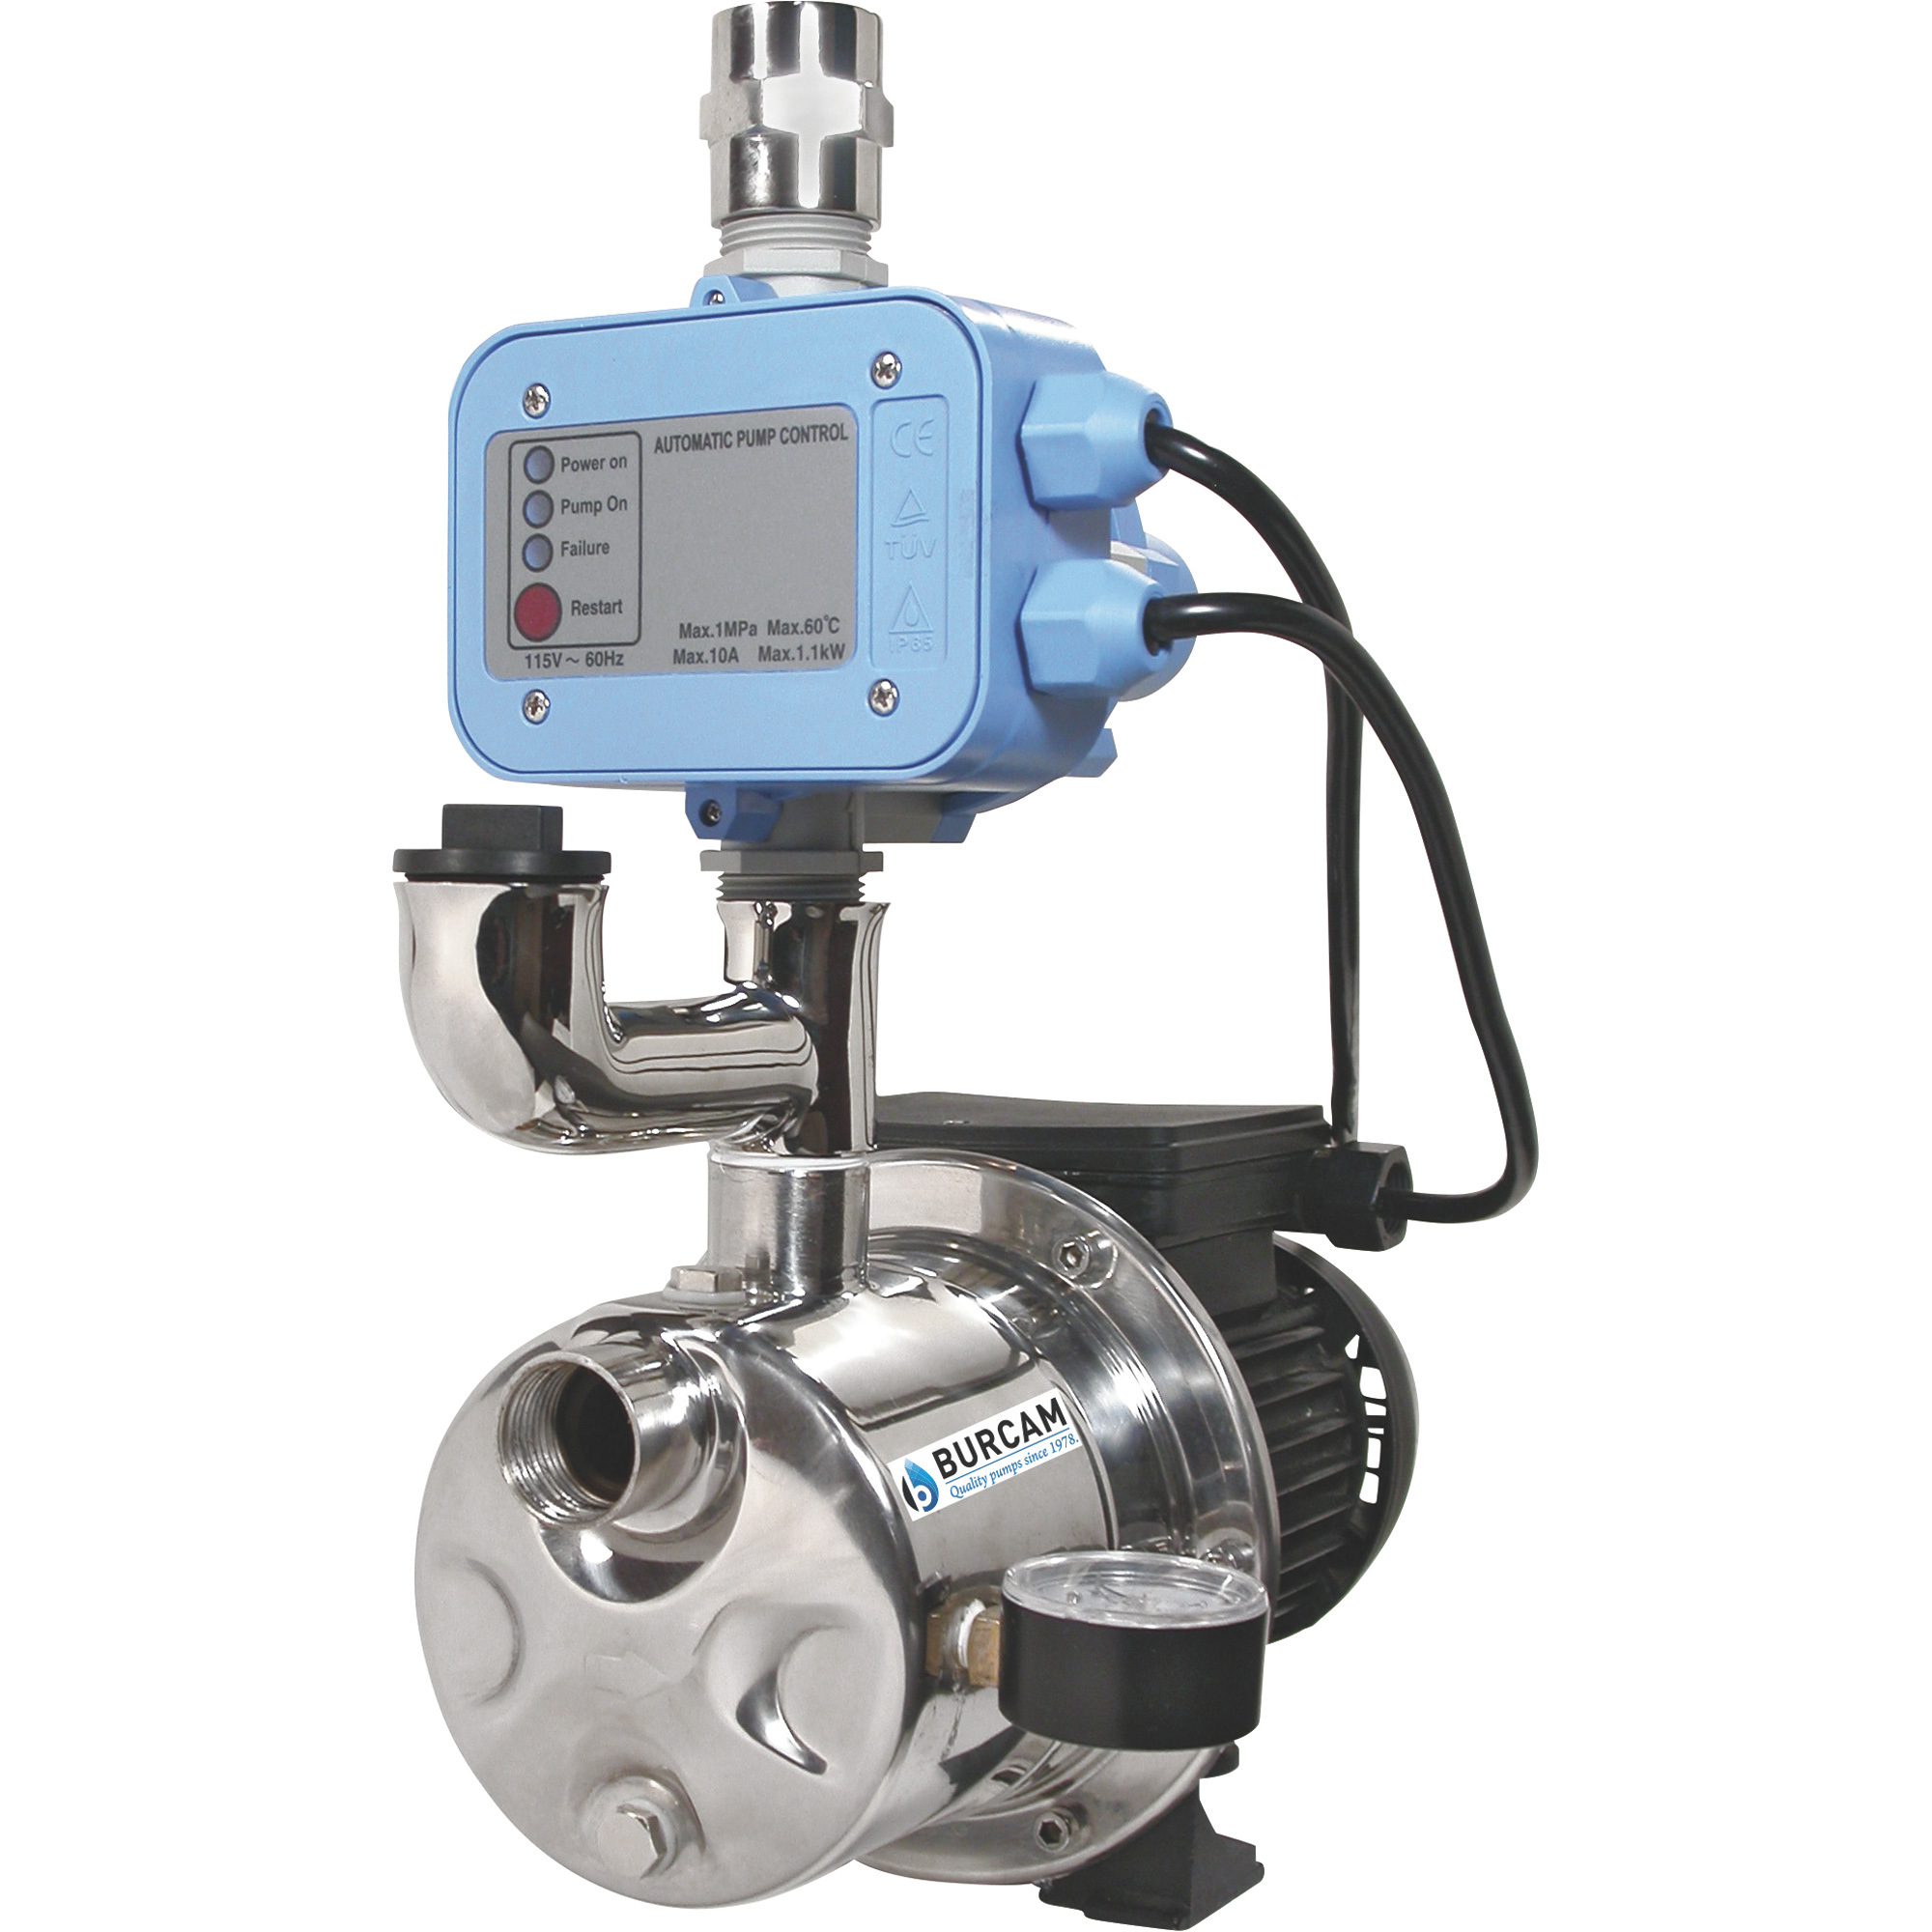 Pressure Booster/Shallow Well Jet Water Pump — 900 GPH, 3/4 HP, 1Inch Ports, Model - BurCam 506532SS